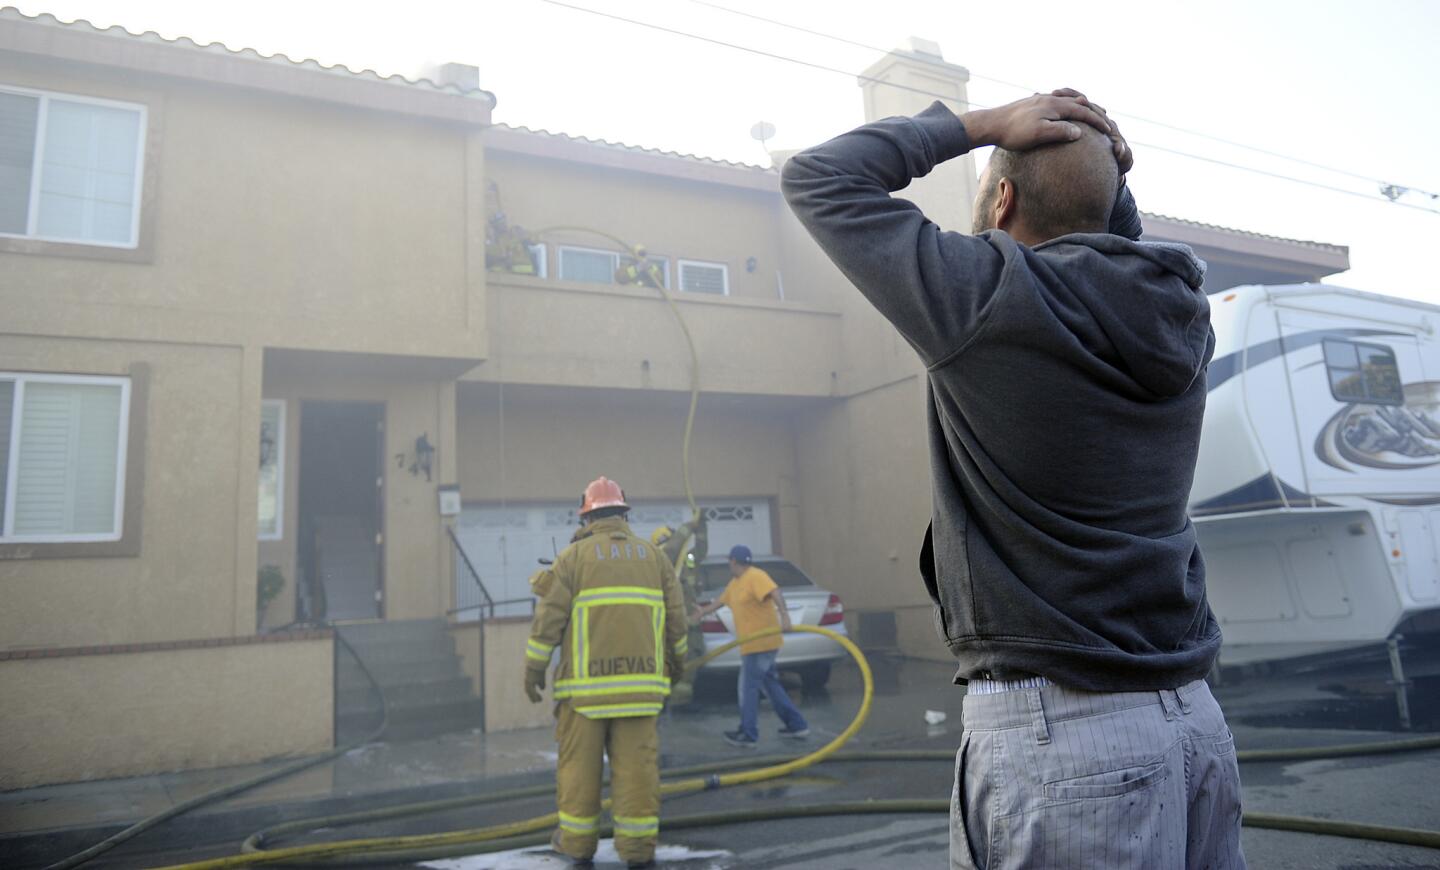 A resident watches the roof of his house burn as firefighters battle the blaze on North Marshall Court in San Pedro on Friday.